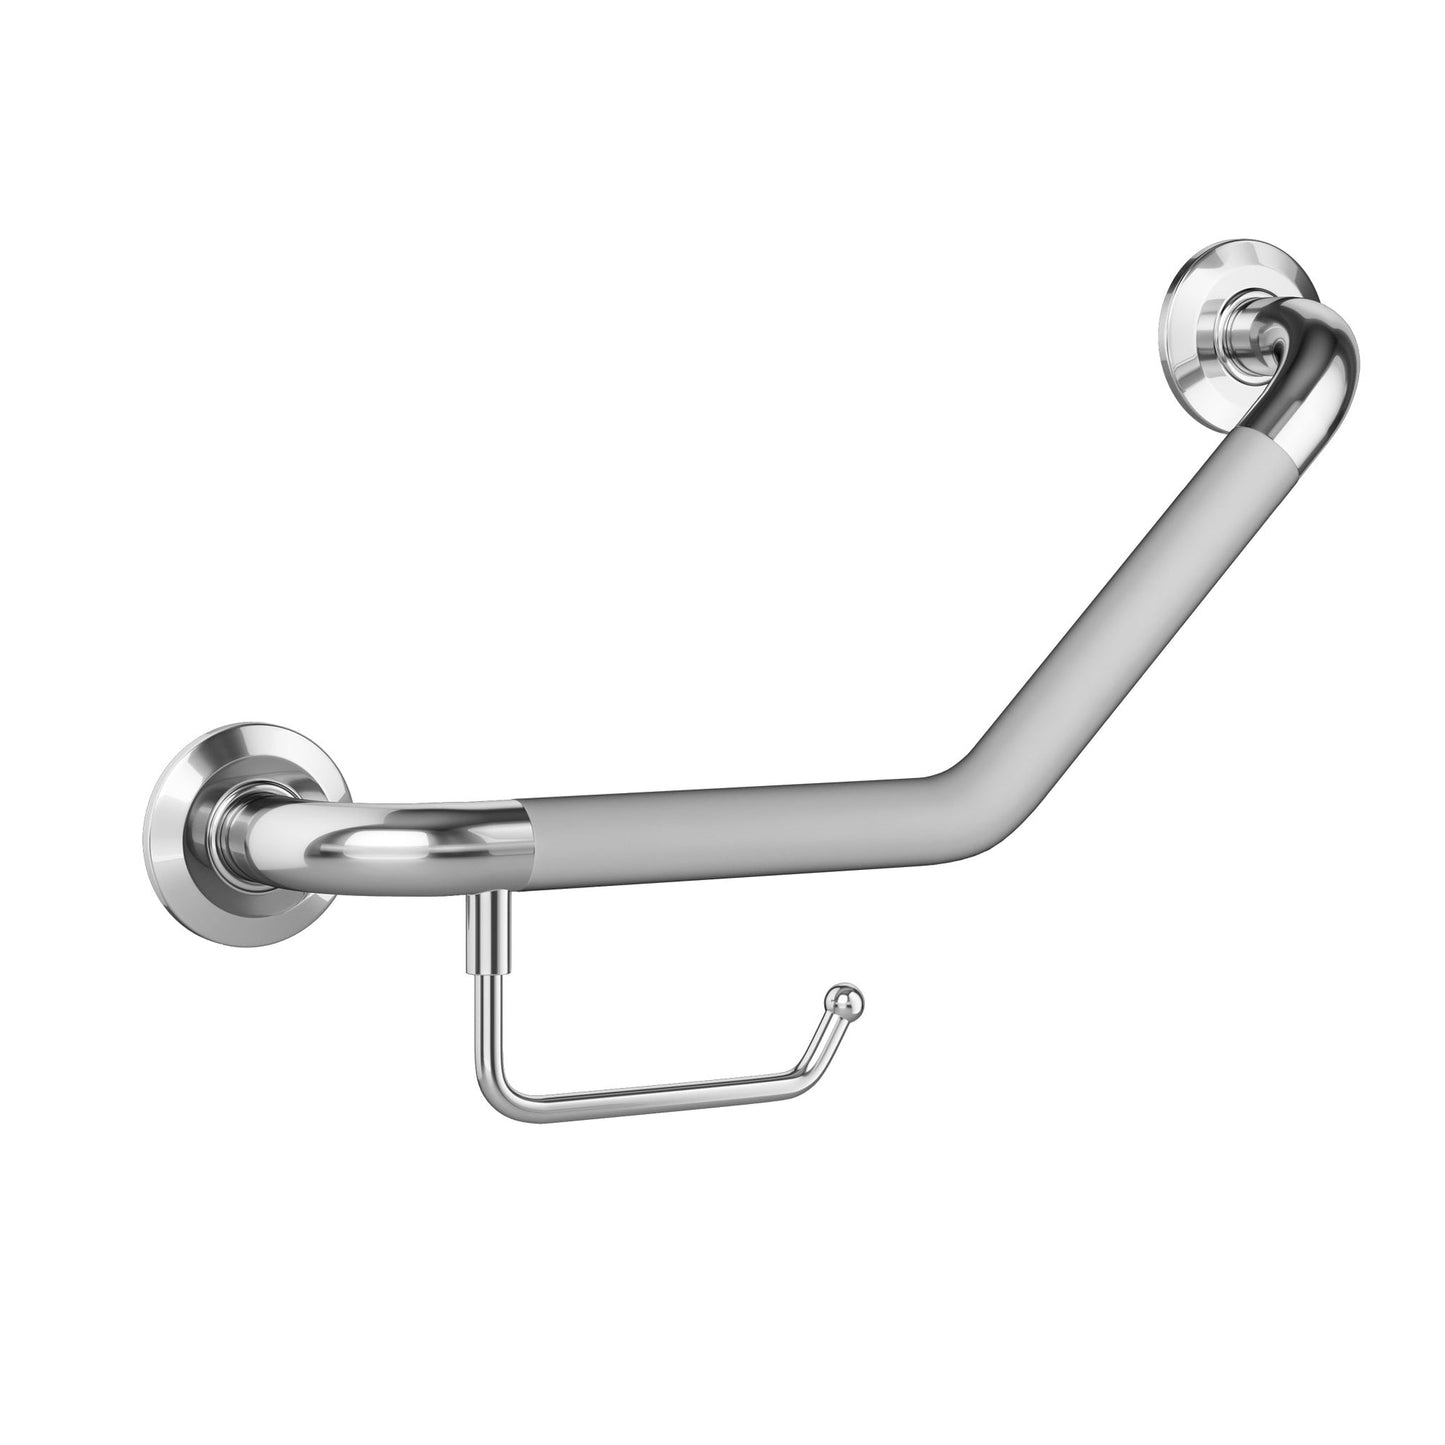 PULSE ShowerSpas Ergo Angle Bar in Polished Stainless Steel